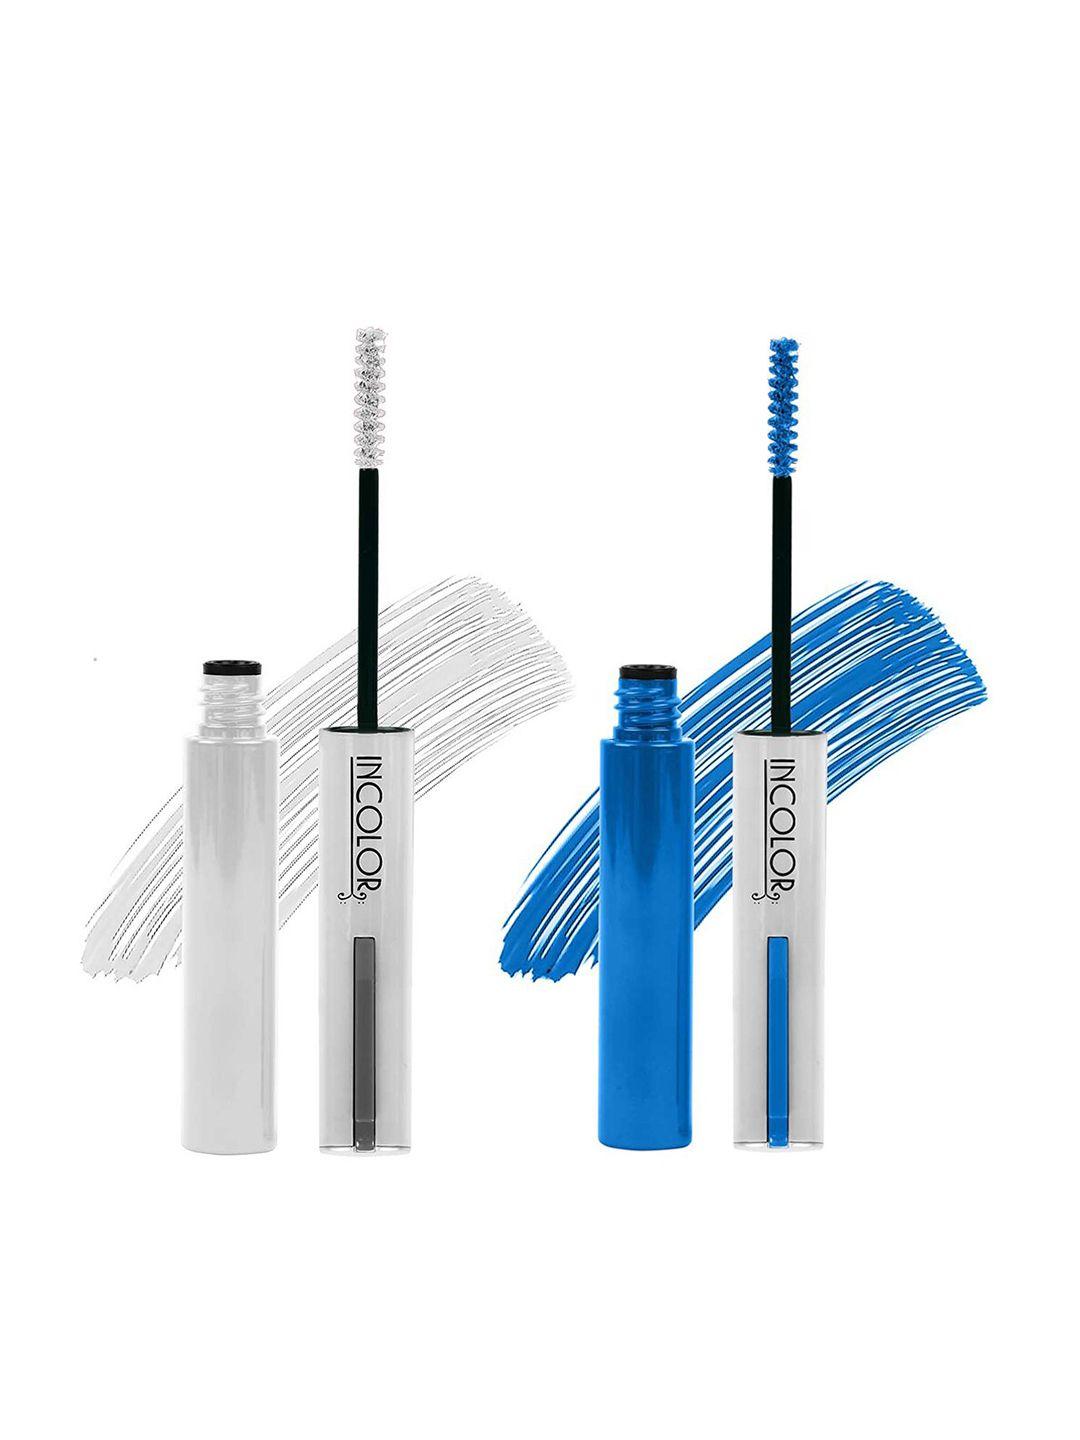 incolor set of 2 light weight color mascara 6ml each - milky white 02 & blueberry pop 03